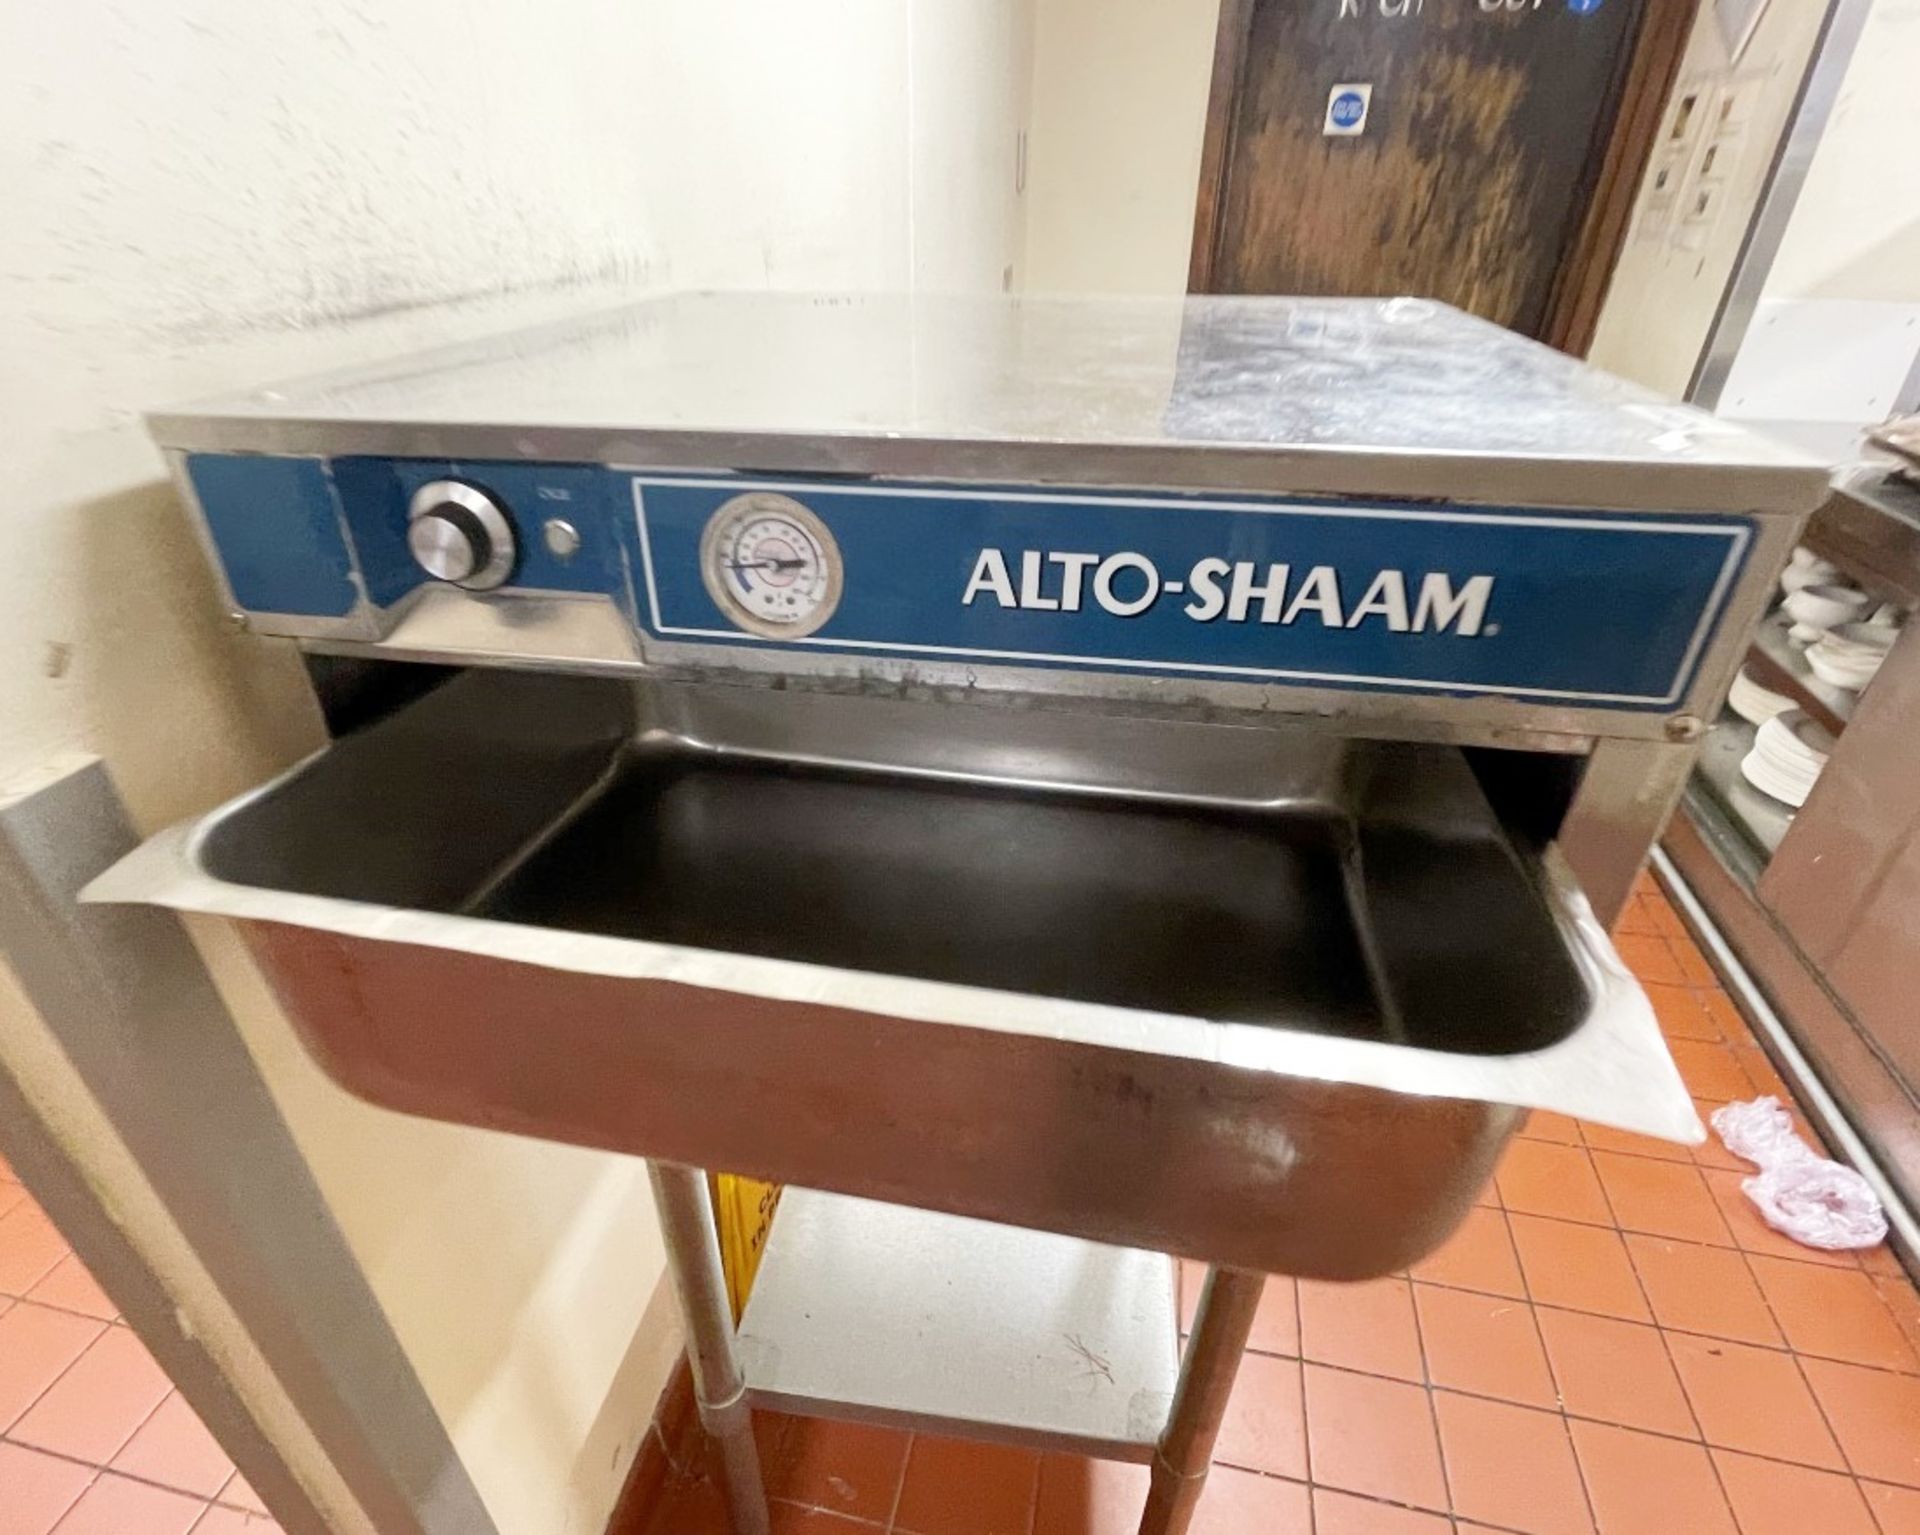 1 x Alto-Shaam Food Warmer Drawer With Stand - Model 500-1D - 240v Power - Dimensions: H296 x W62 - Image 5 of 6